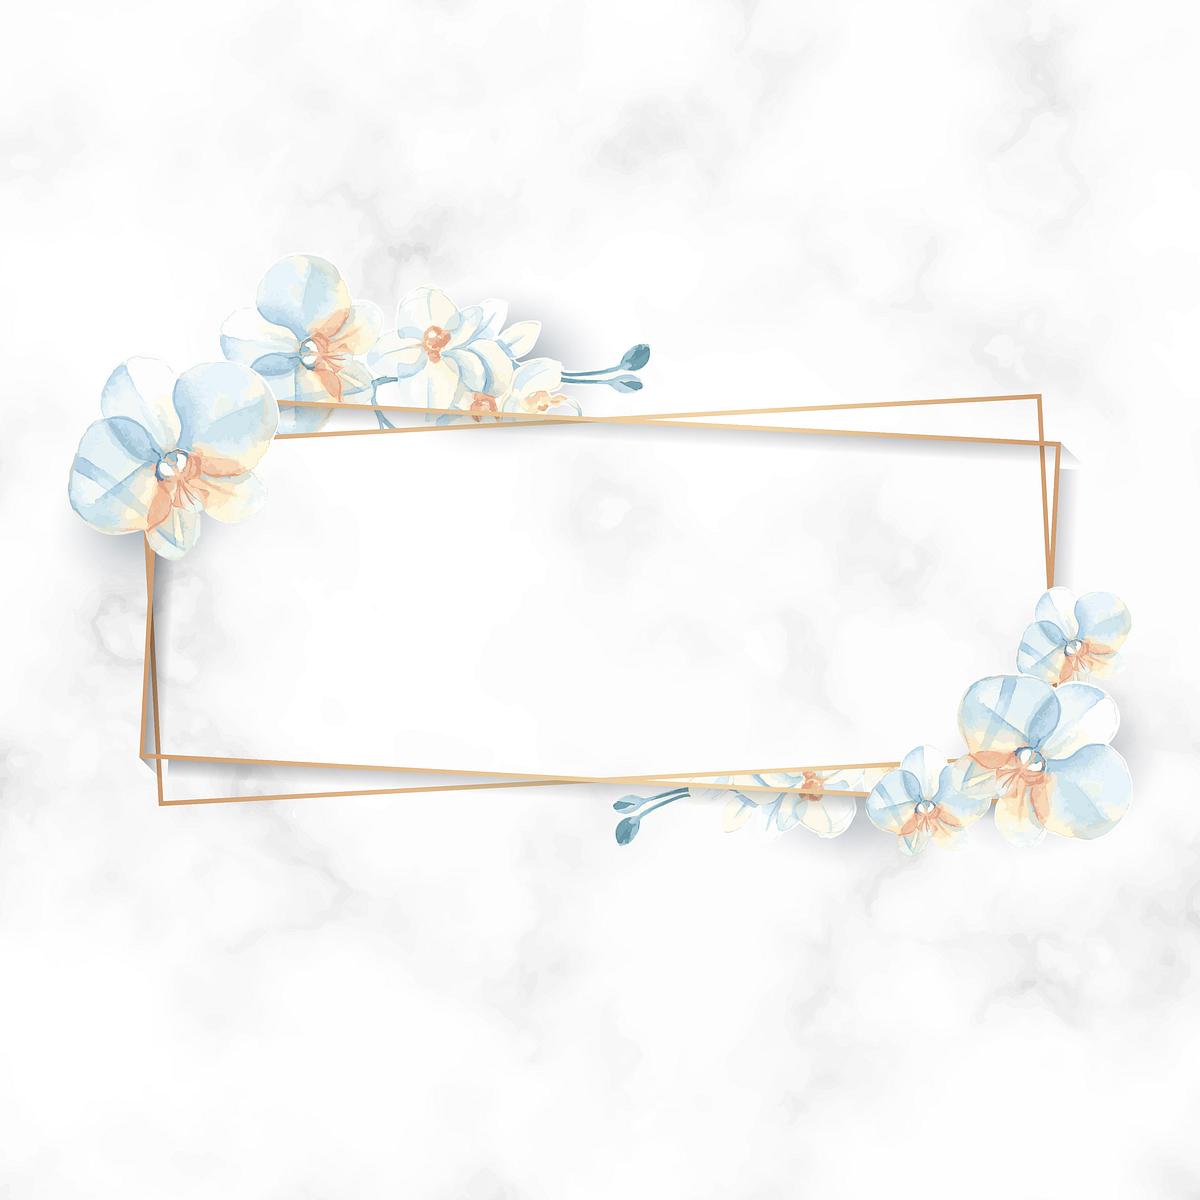 Download Blooming flower rectangle frame | Royalty free stock ...